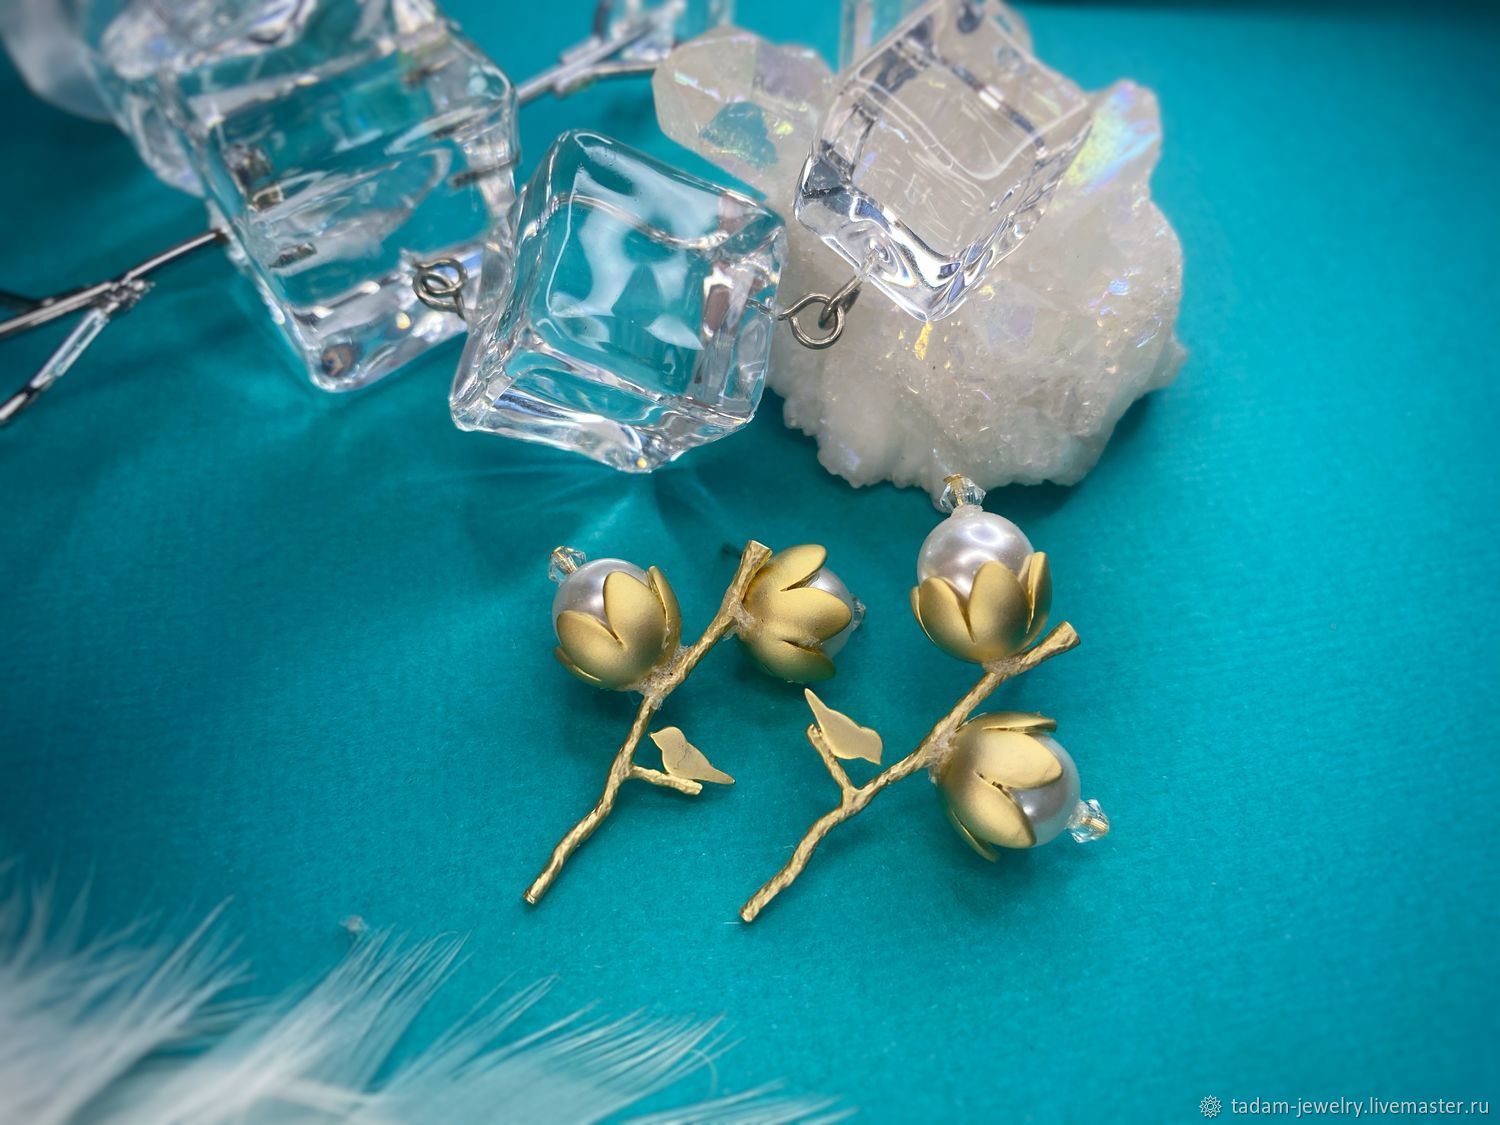 Earrings with pearls and Swarovski crystals Winter birds, Earrings, Moscow,  Фото №1